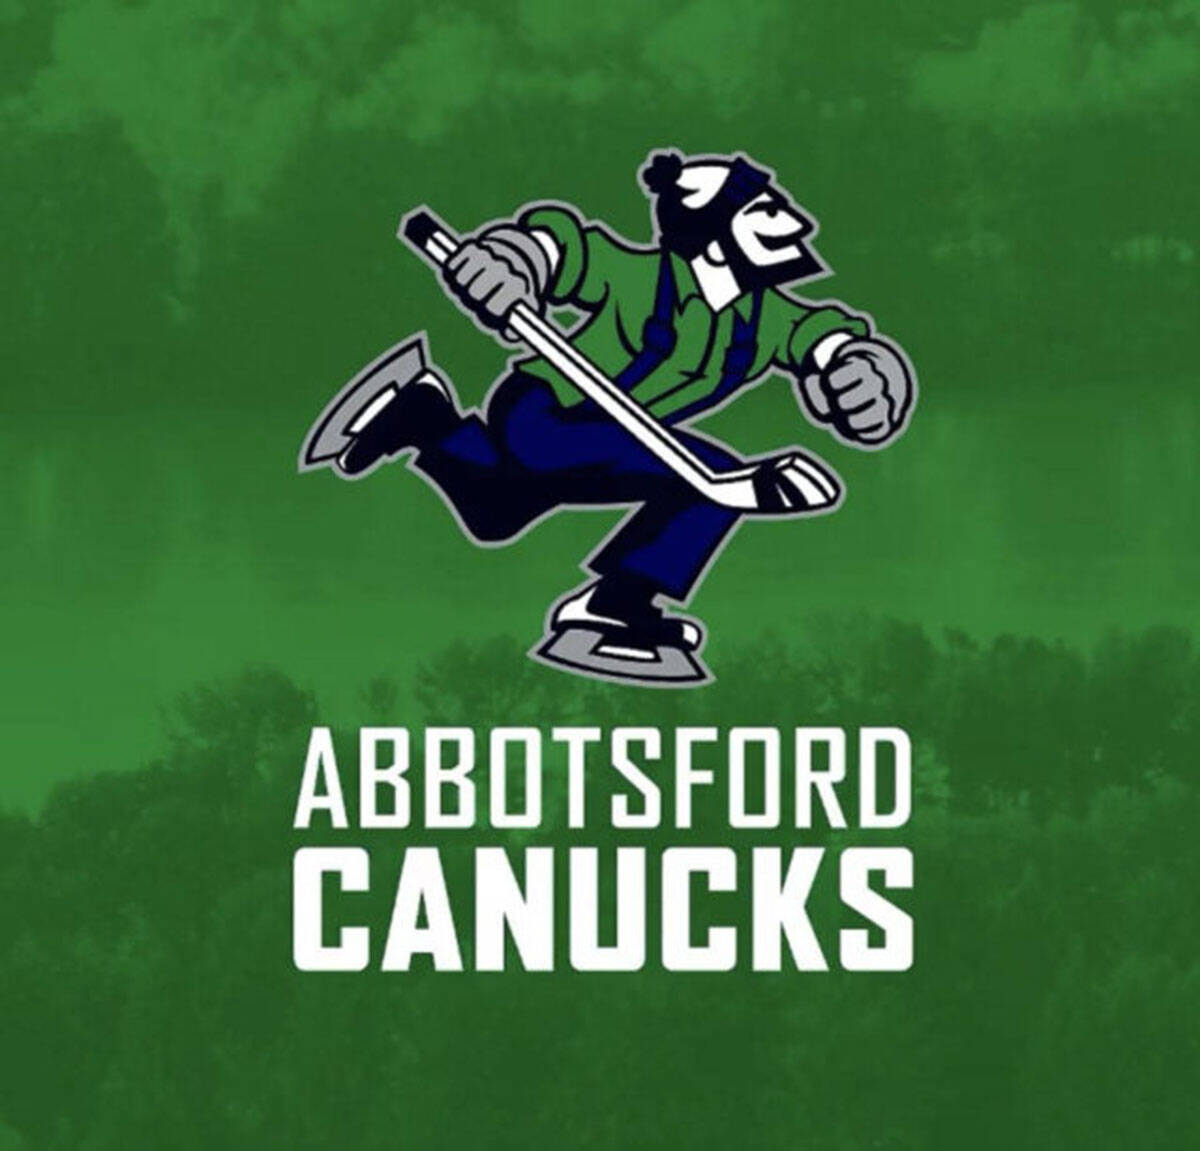 Single game tickets for Abbotsford Canucks on sale starting Oct